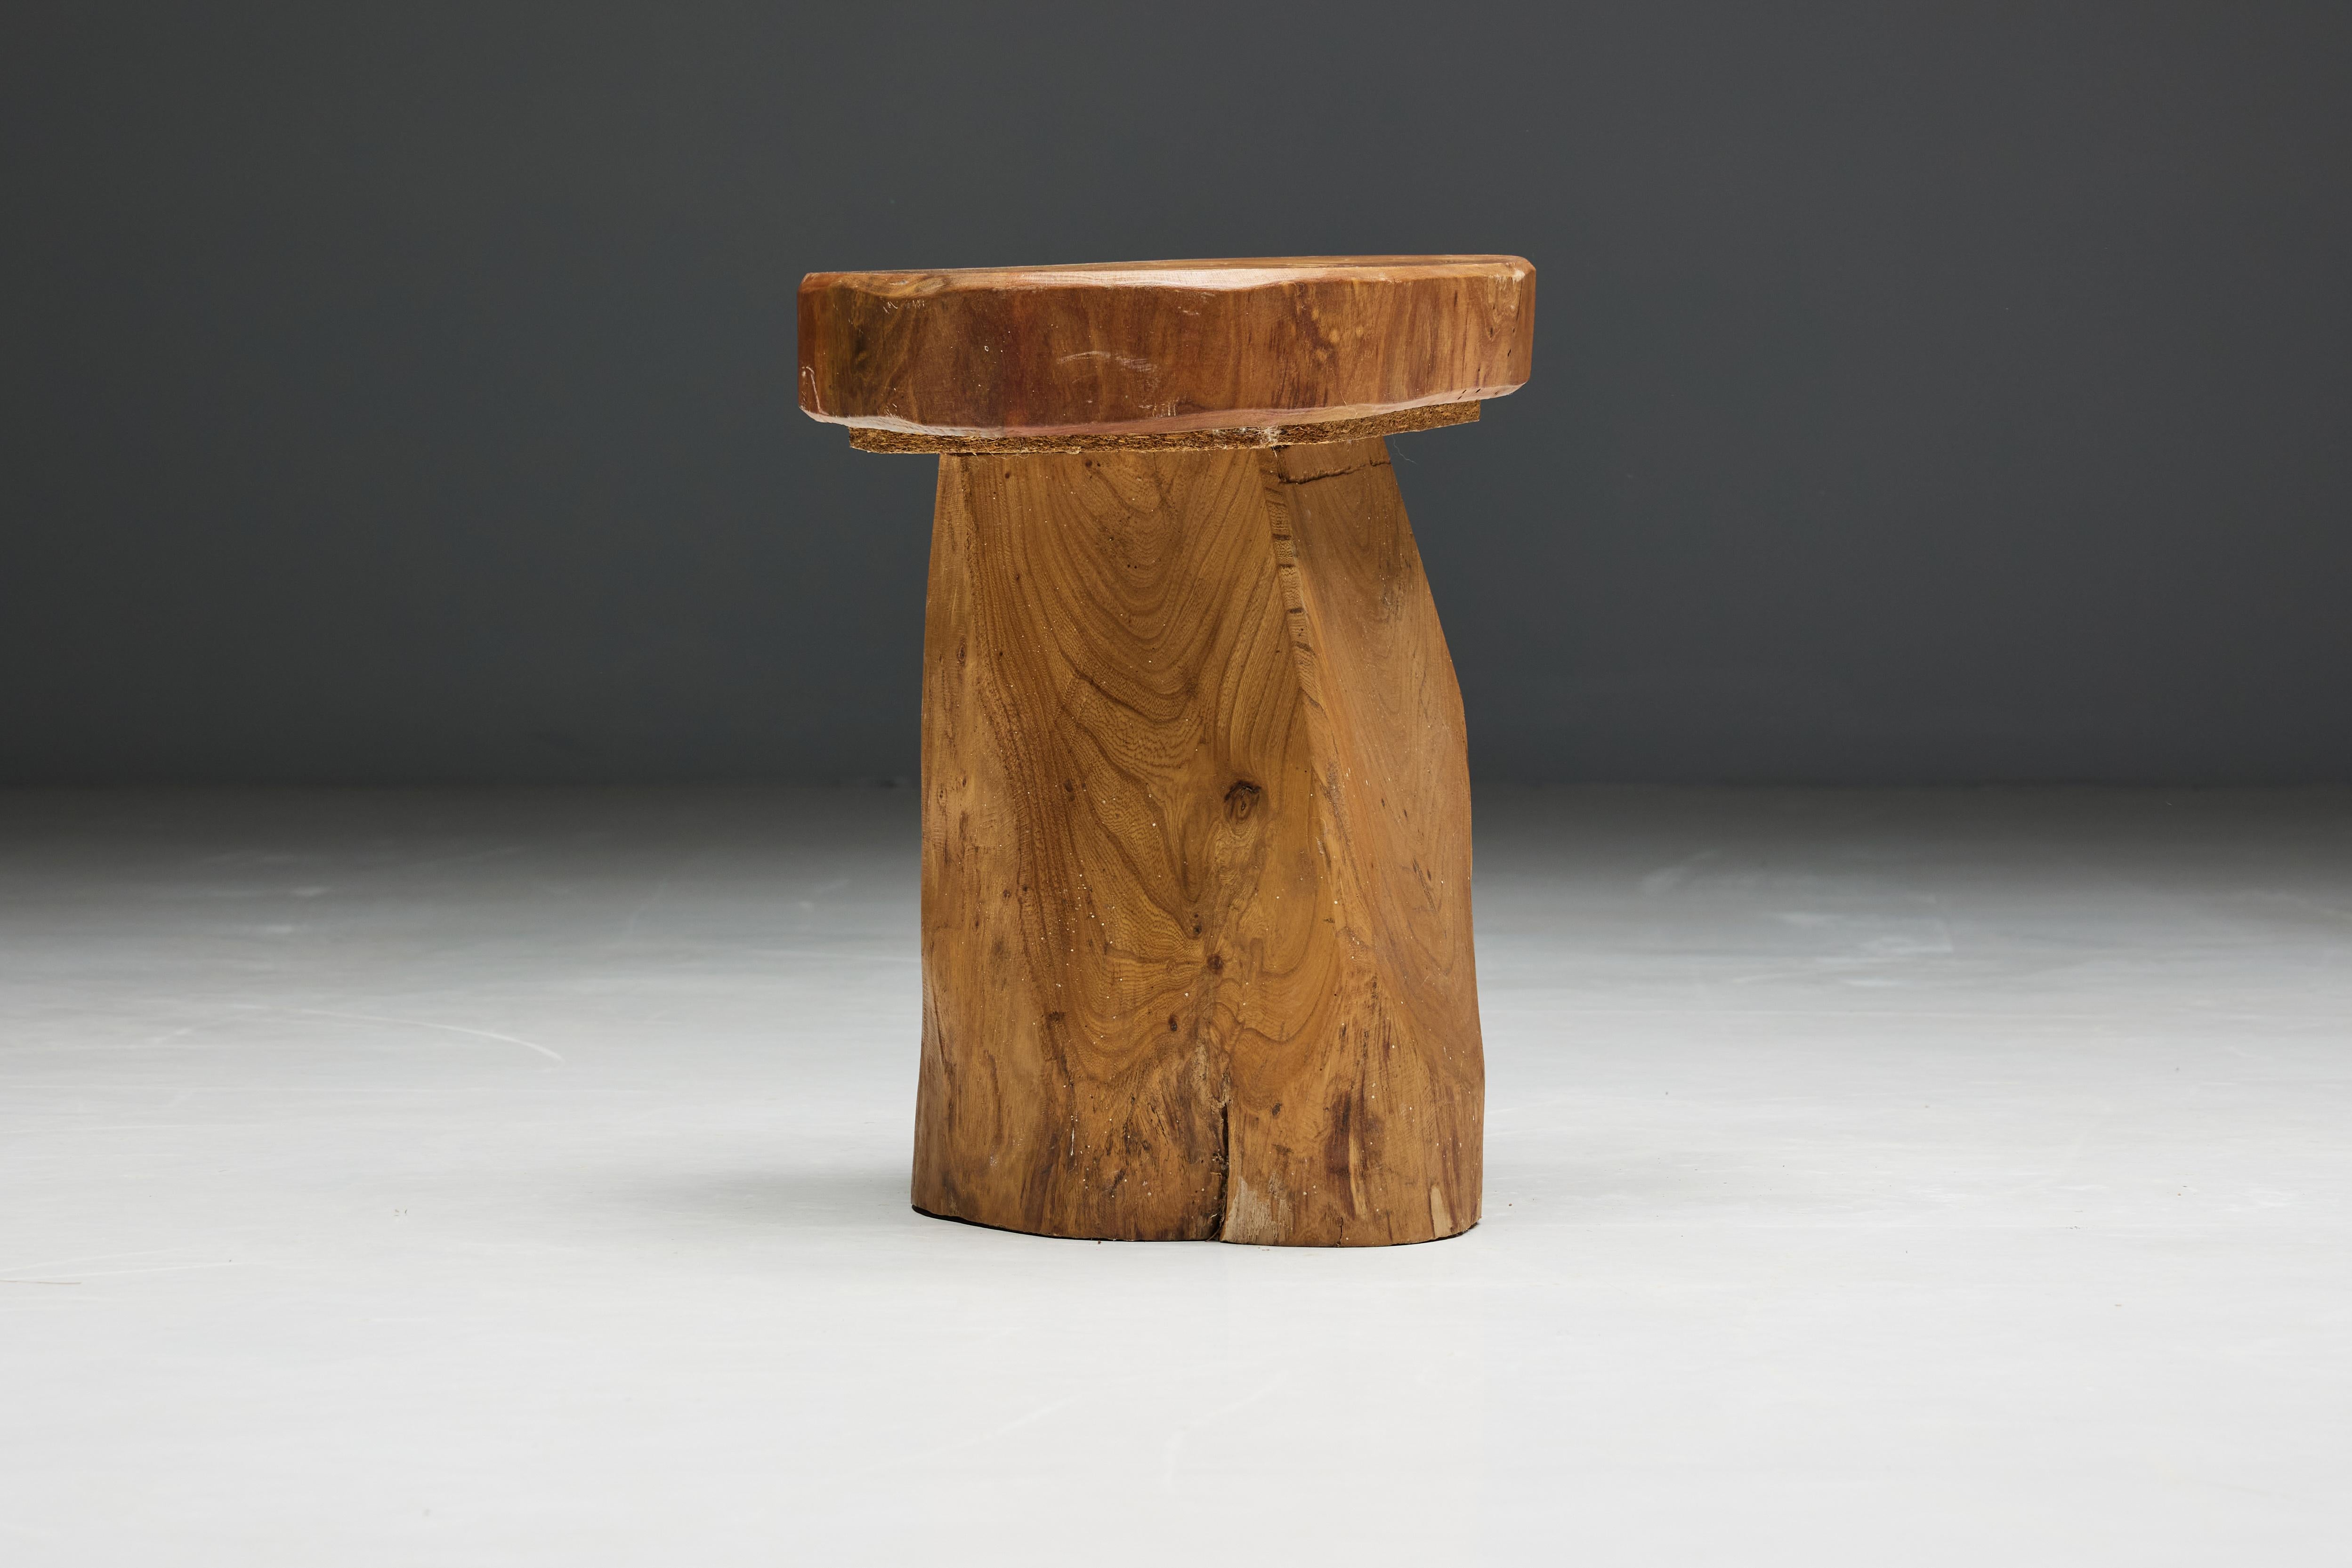 Wood Monoxylite Stools in the Style of Zanine Caldas, Brazil, 1970s For Sale